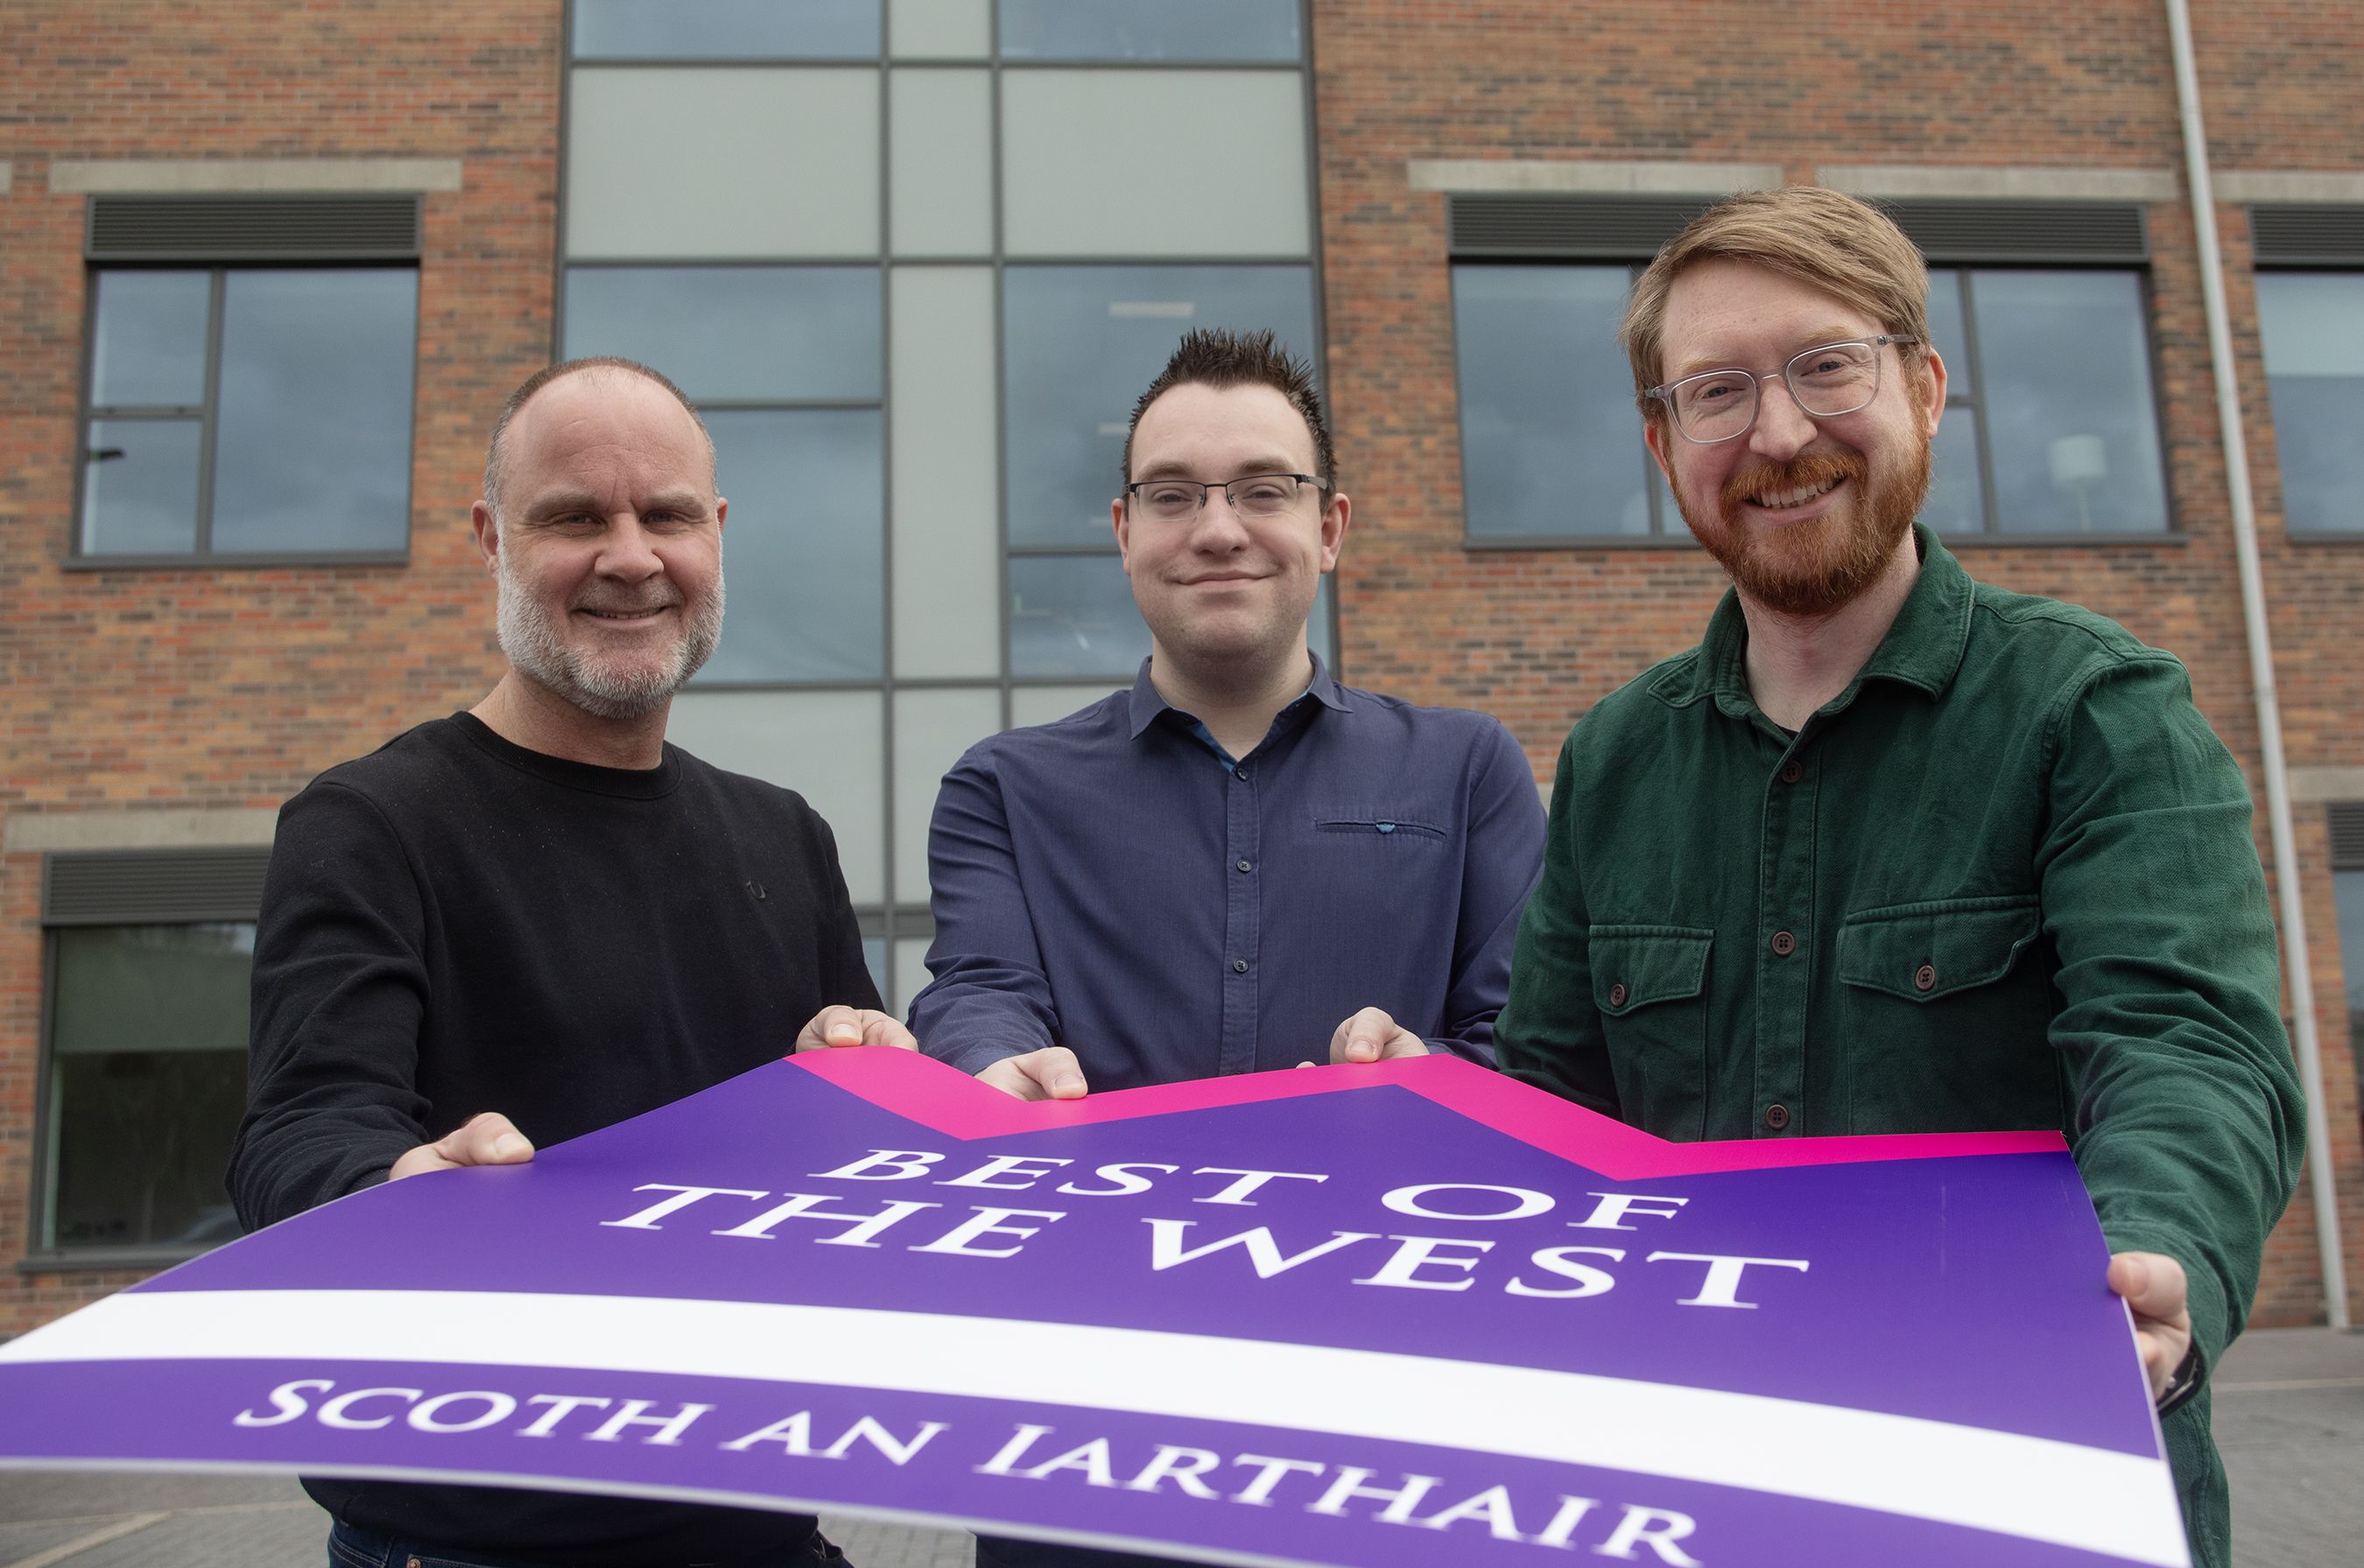 BEST OF THE WEST: Shane Smith (Engagment Manager), Conor McParland (Belfast Media) and Neil Allen (Centre Director) at the Innovation Factory